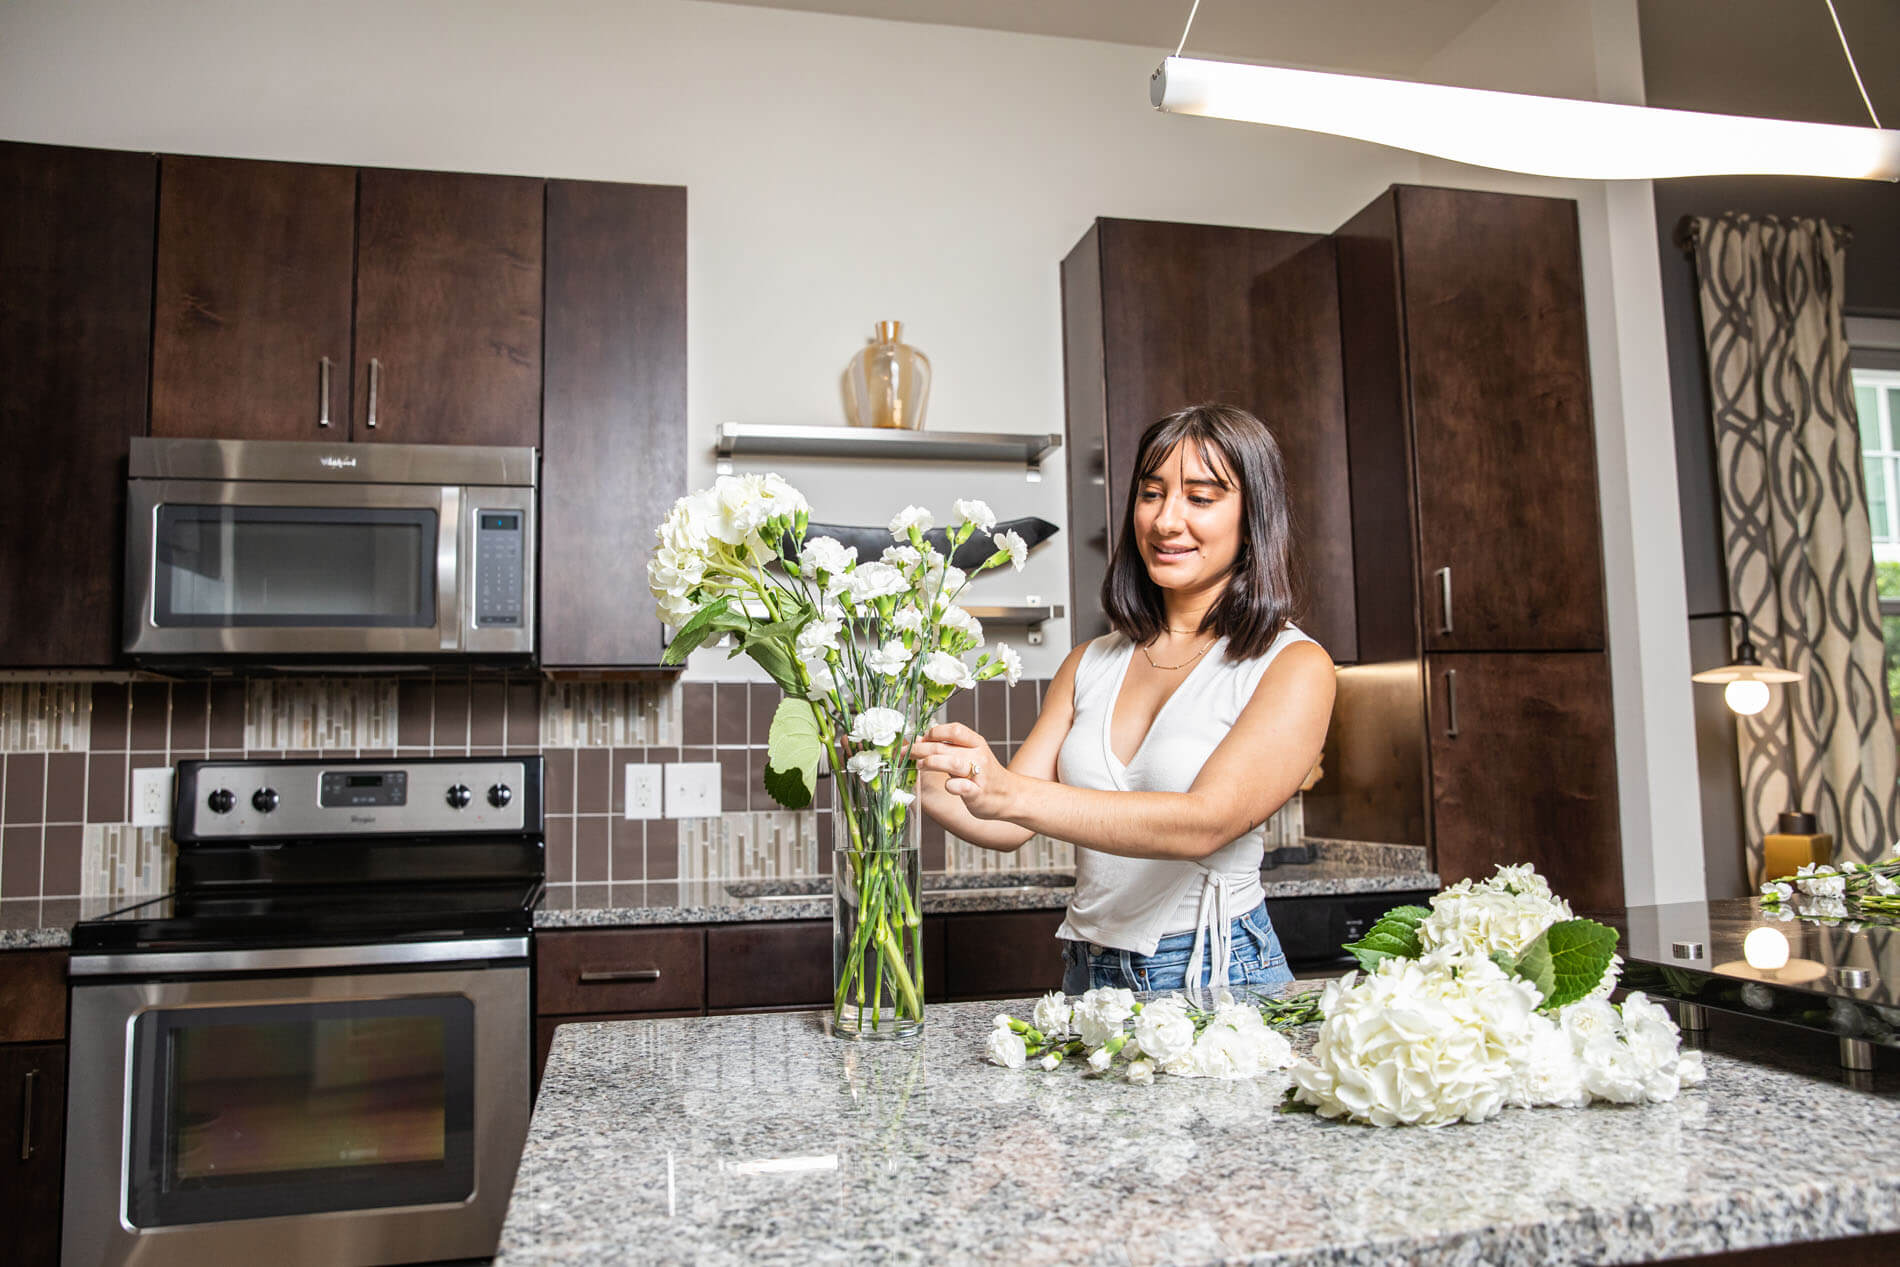 Woman cutting flowers in kitchen